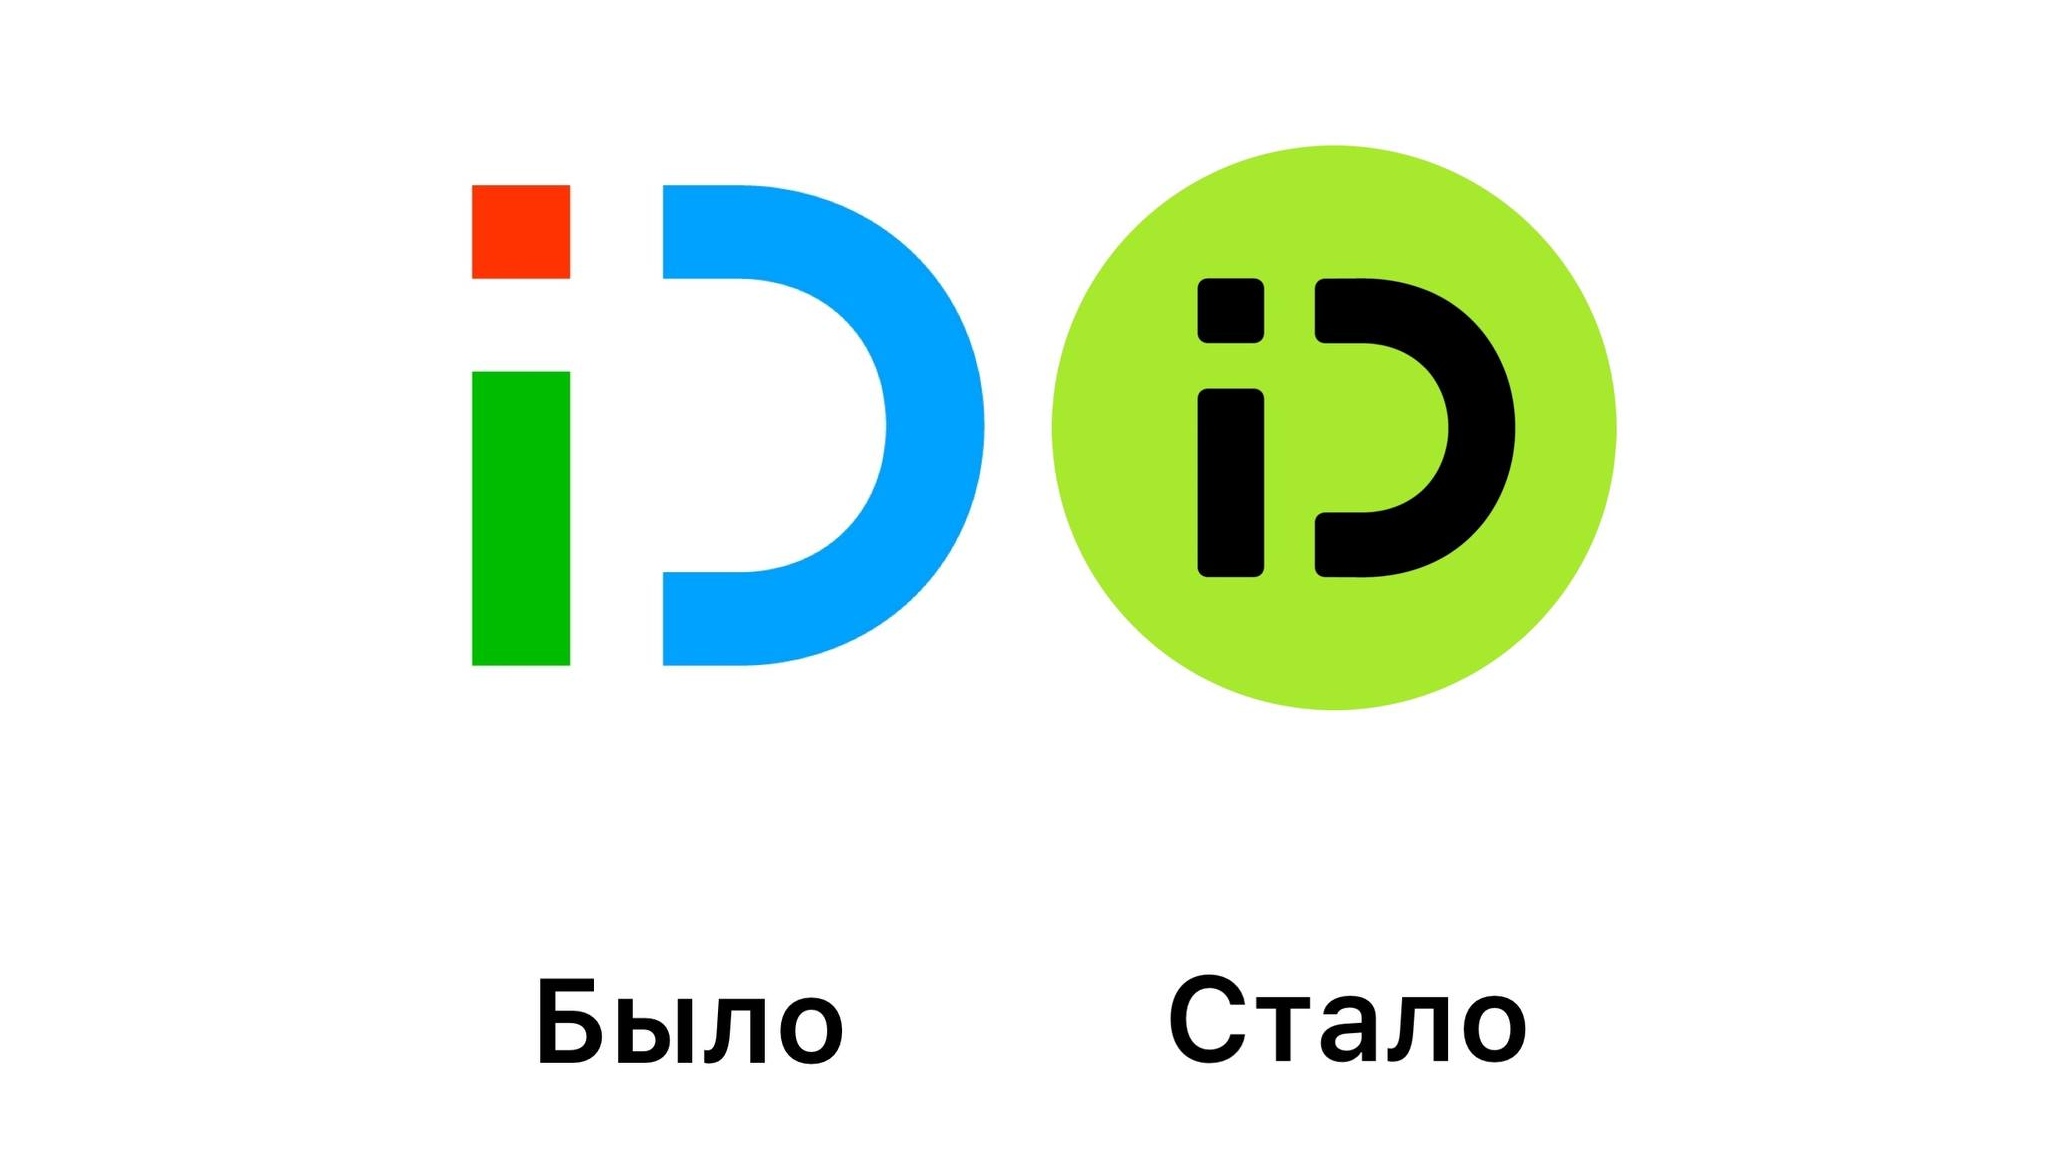 inDriver станет inDrive